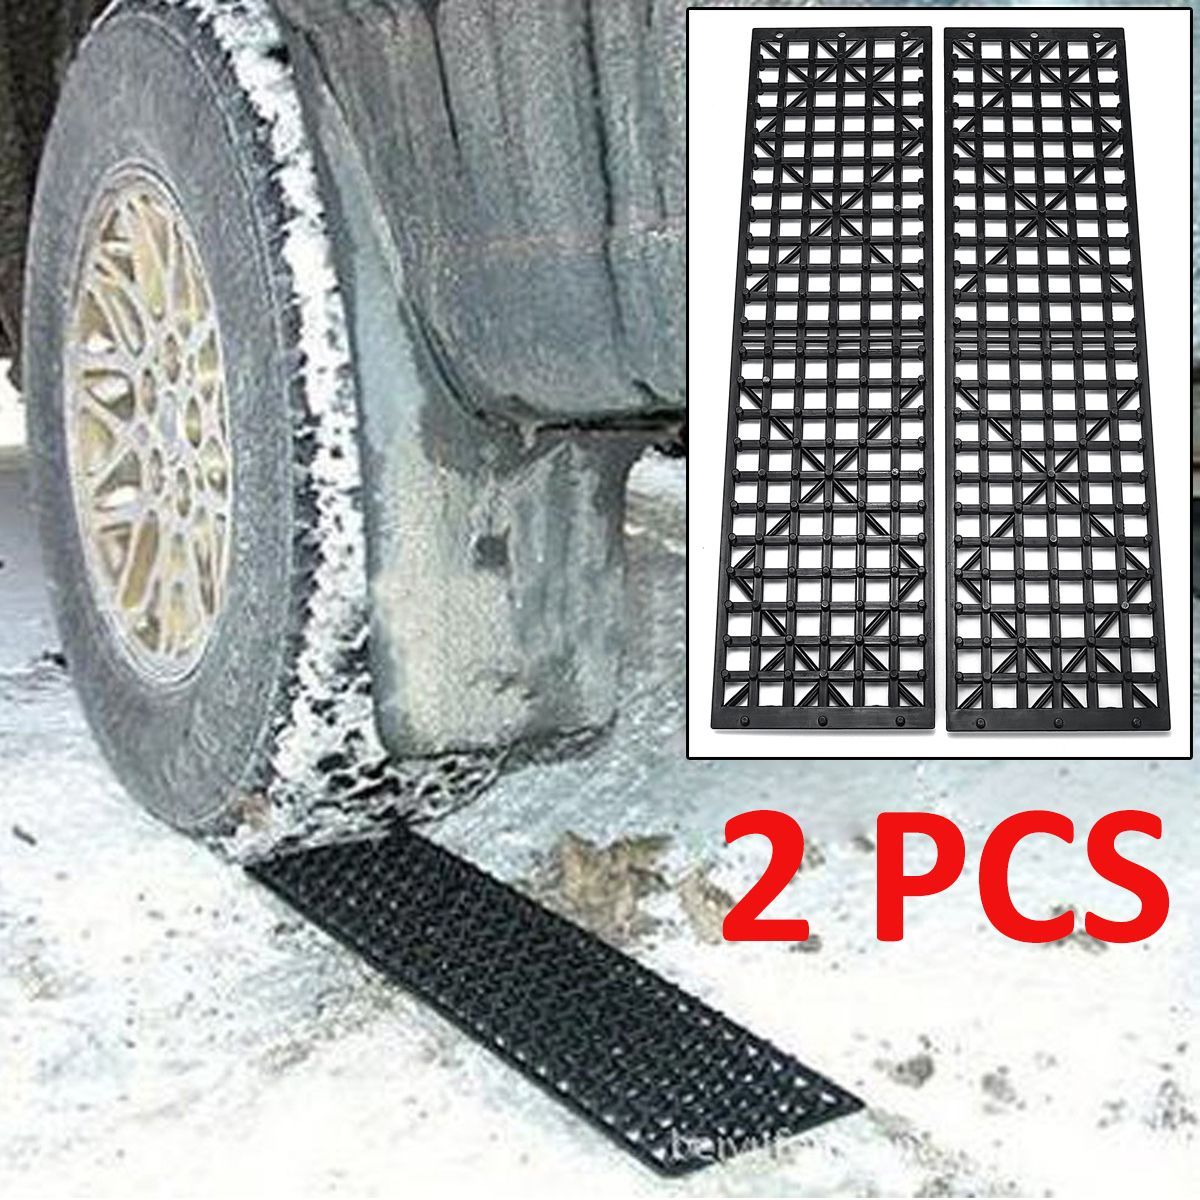 Pair-Black-Recovery-Tracks-Road-Tyre-Ladder-Anti-skid-Sand-Track-for-Mud-Sand-Snow-Grass-1372395